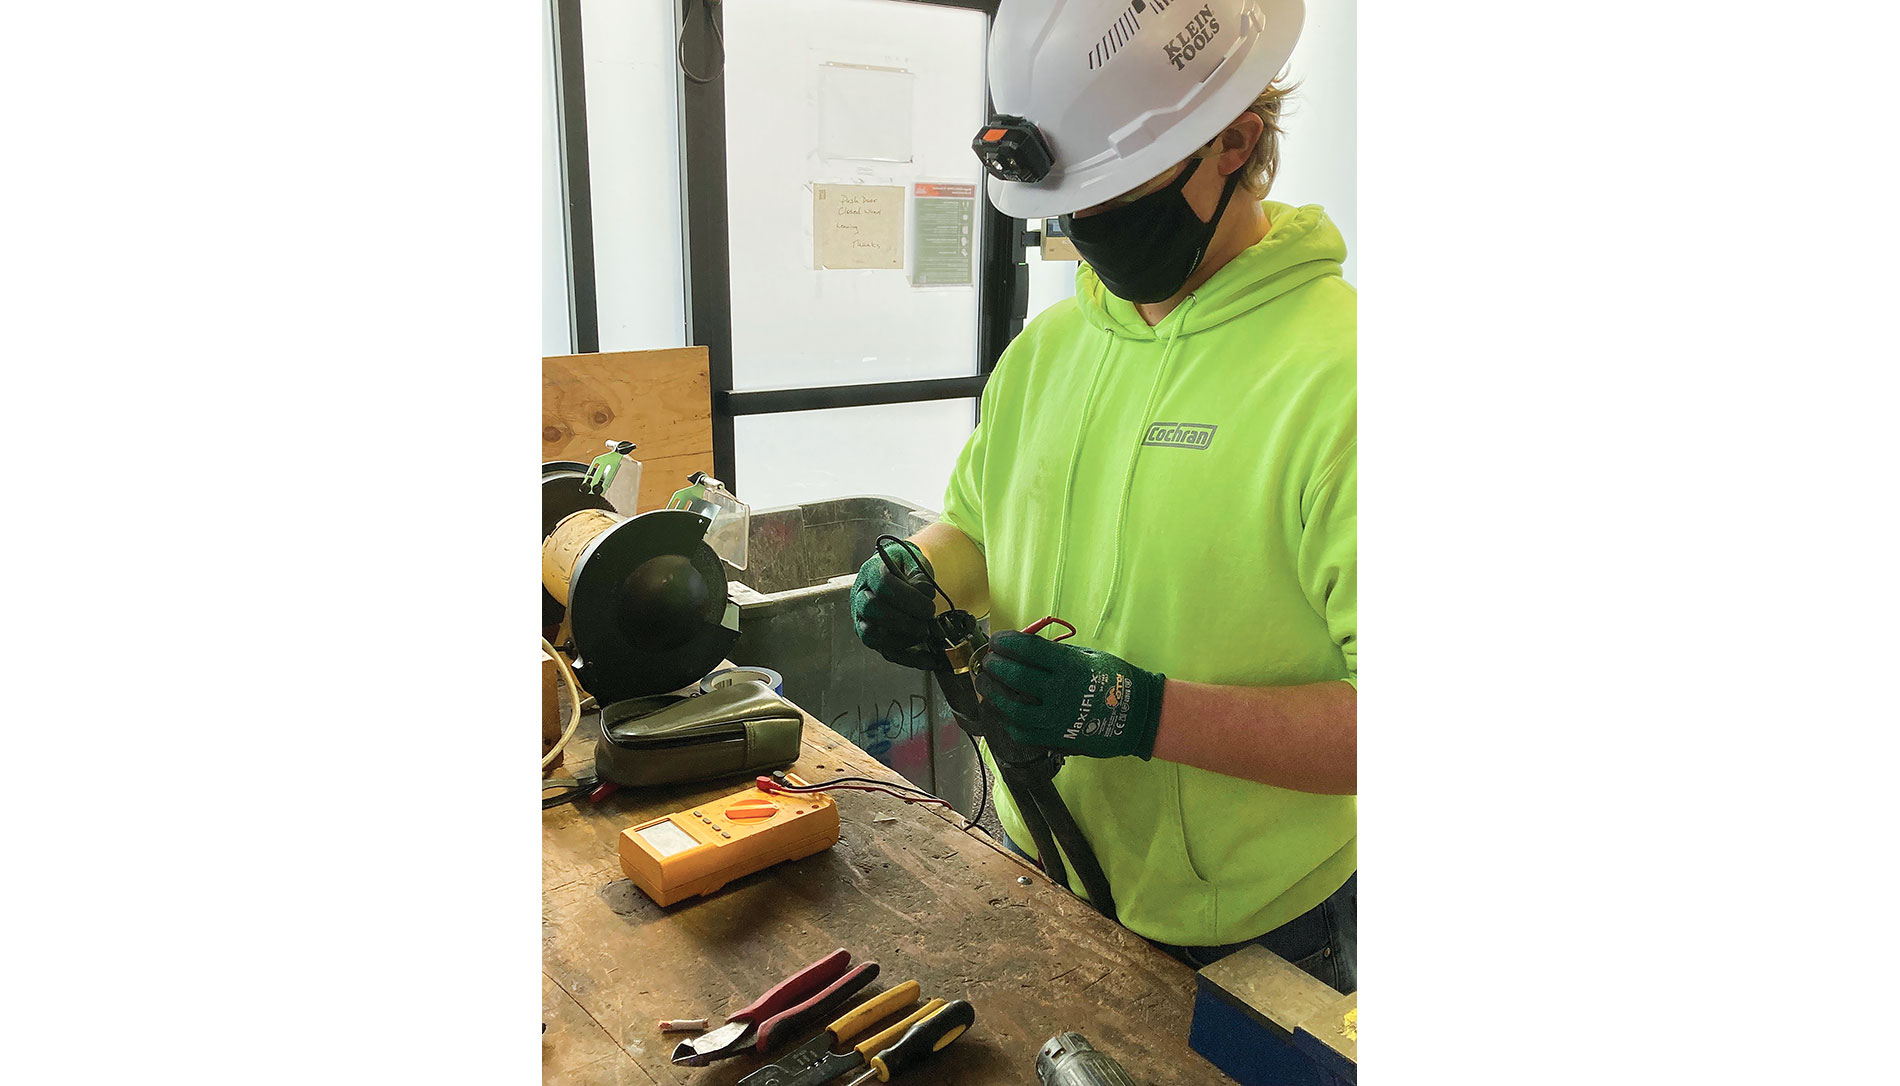 A worker in a Cochran hoodie and protective gear works with cables on a workbench. Image by Cochran Inc.